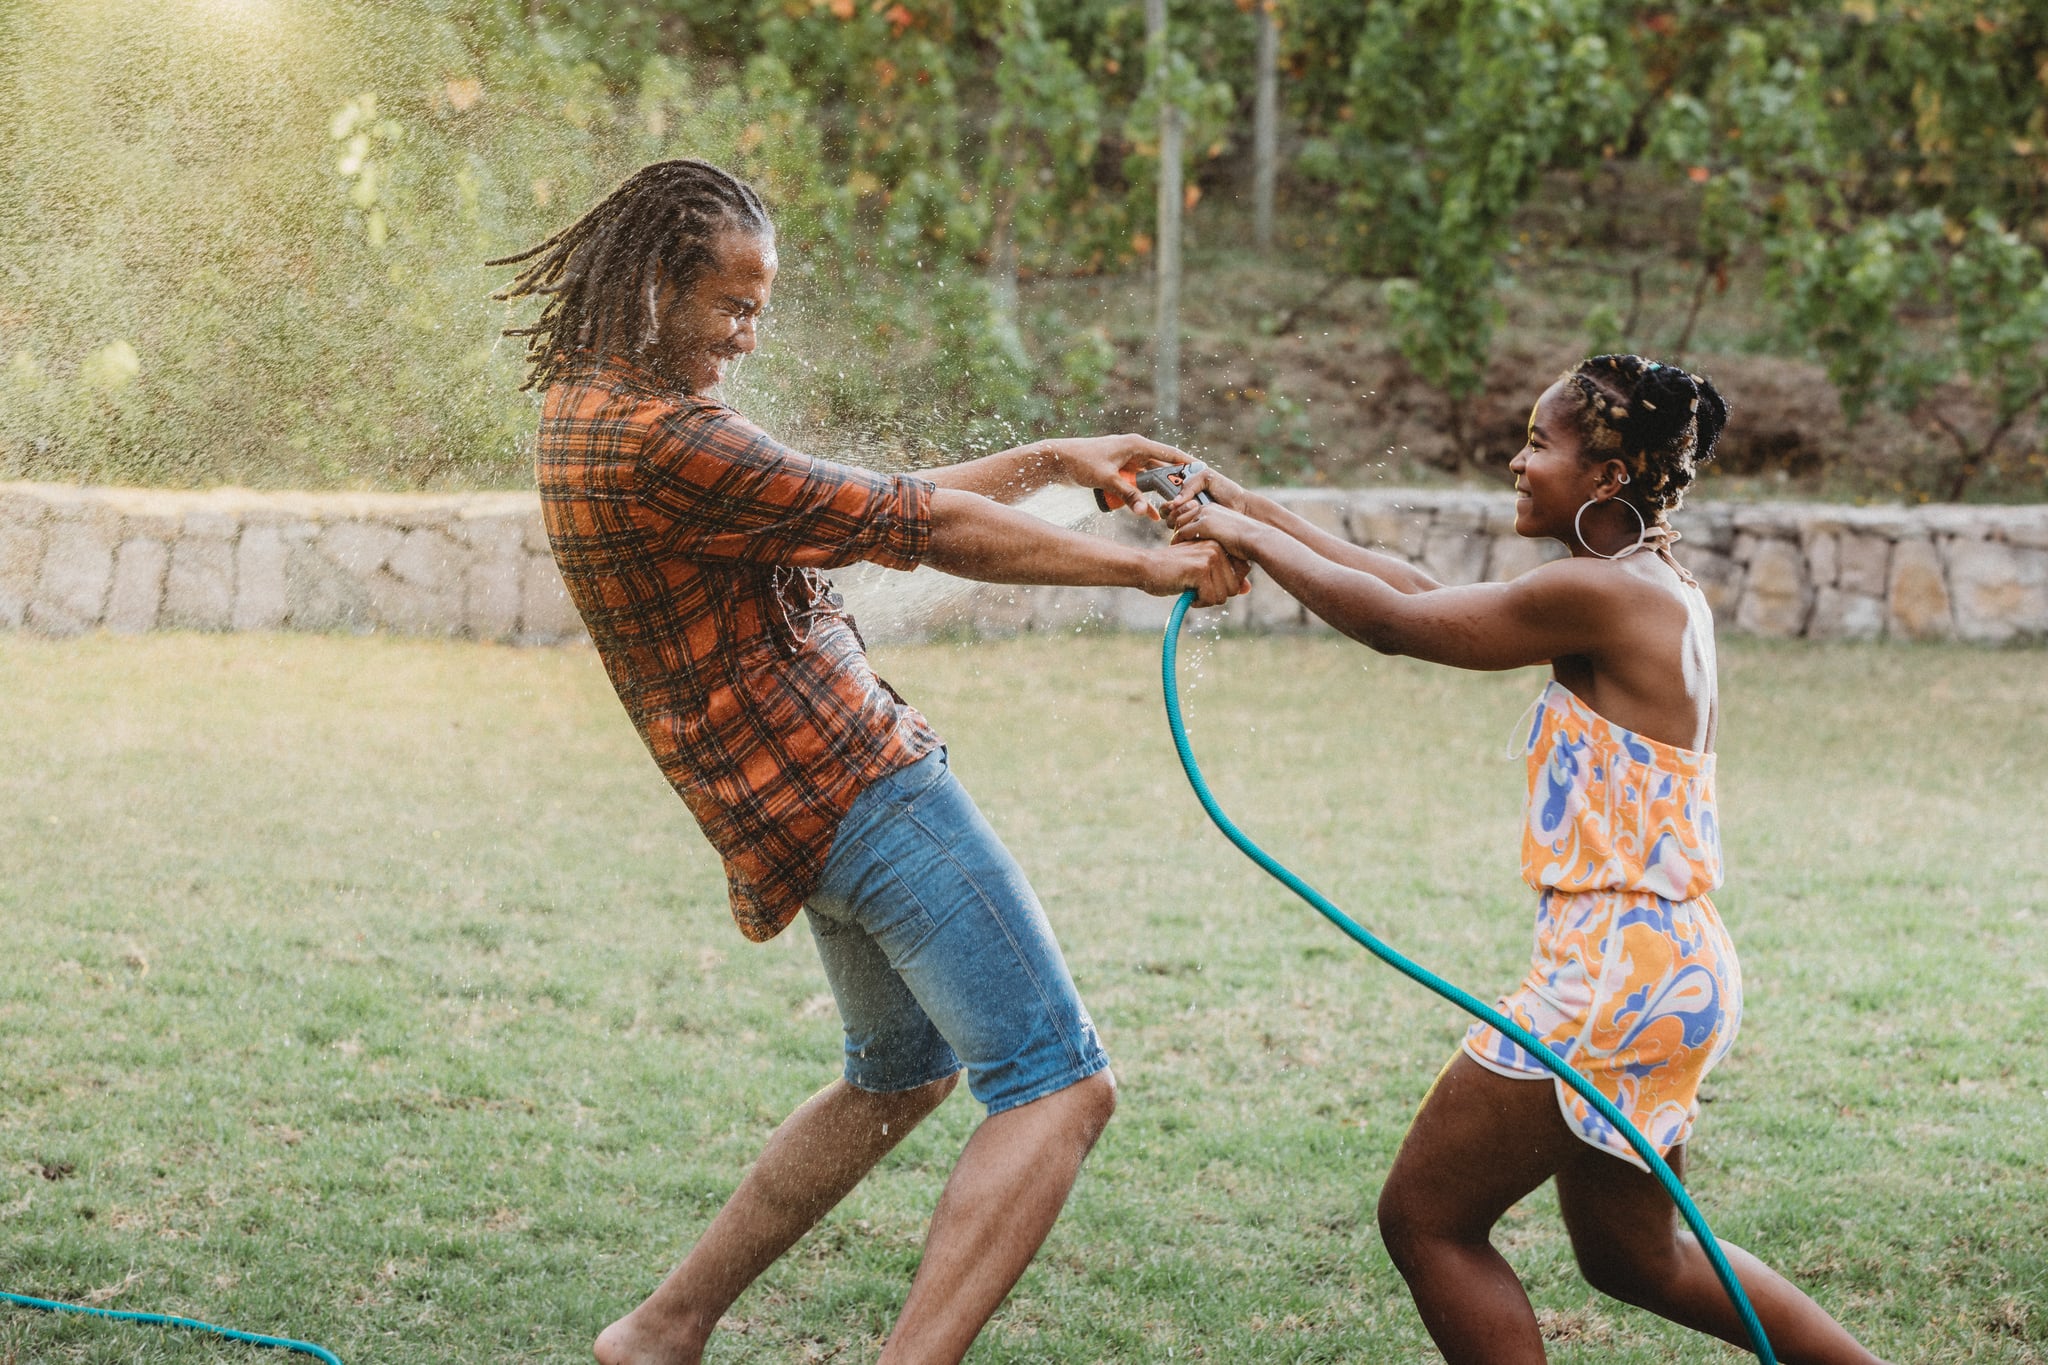 Beautiful young couple playing tug of war with sprinkler hose